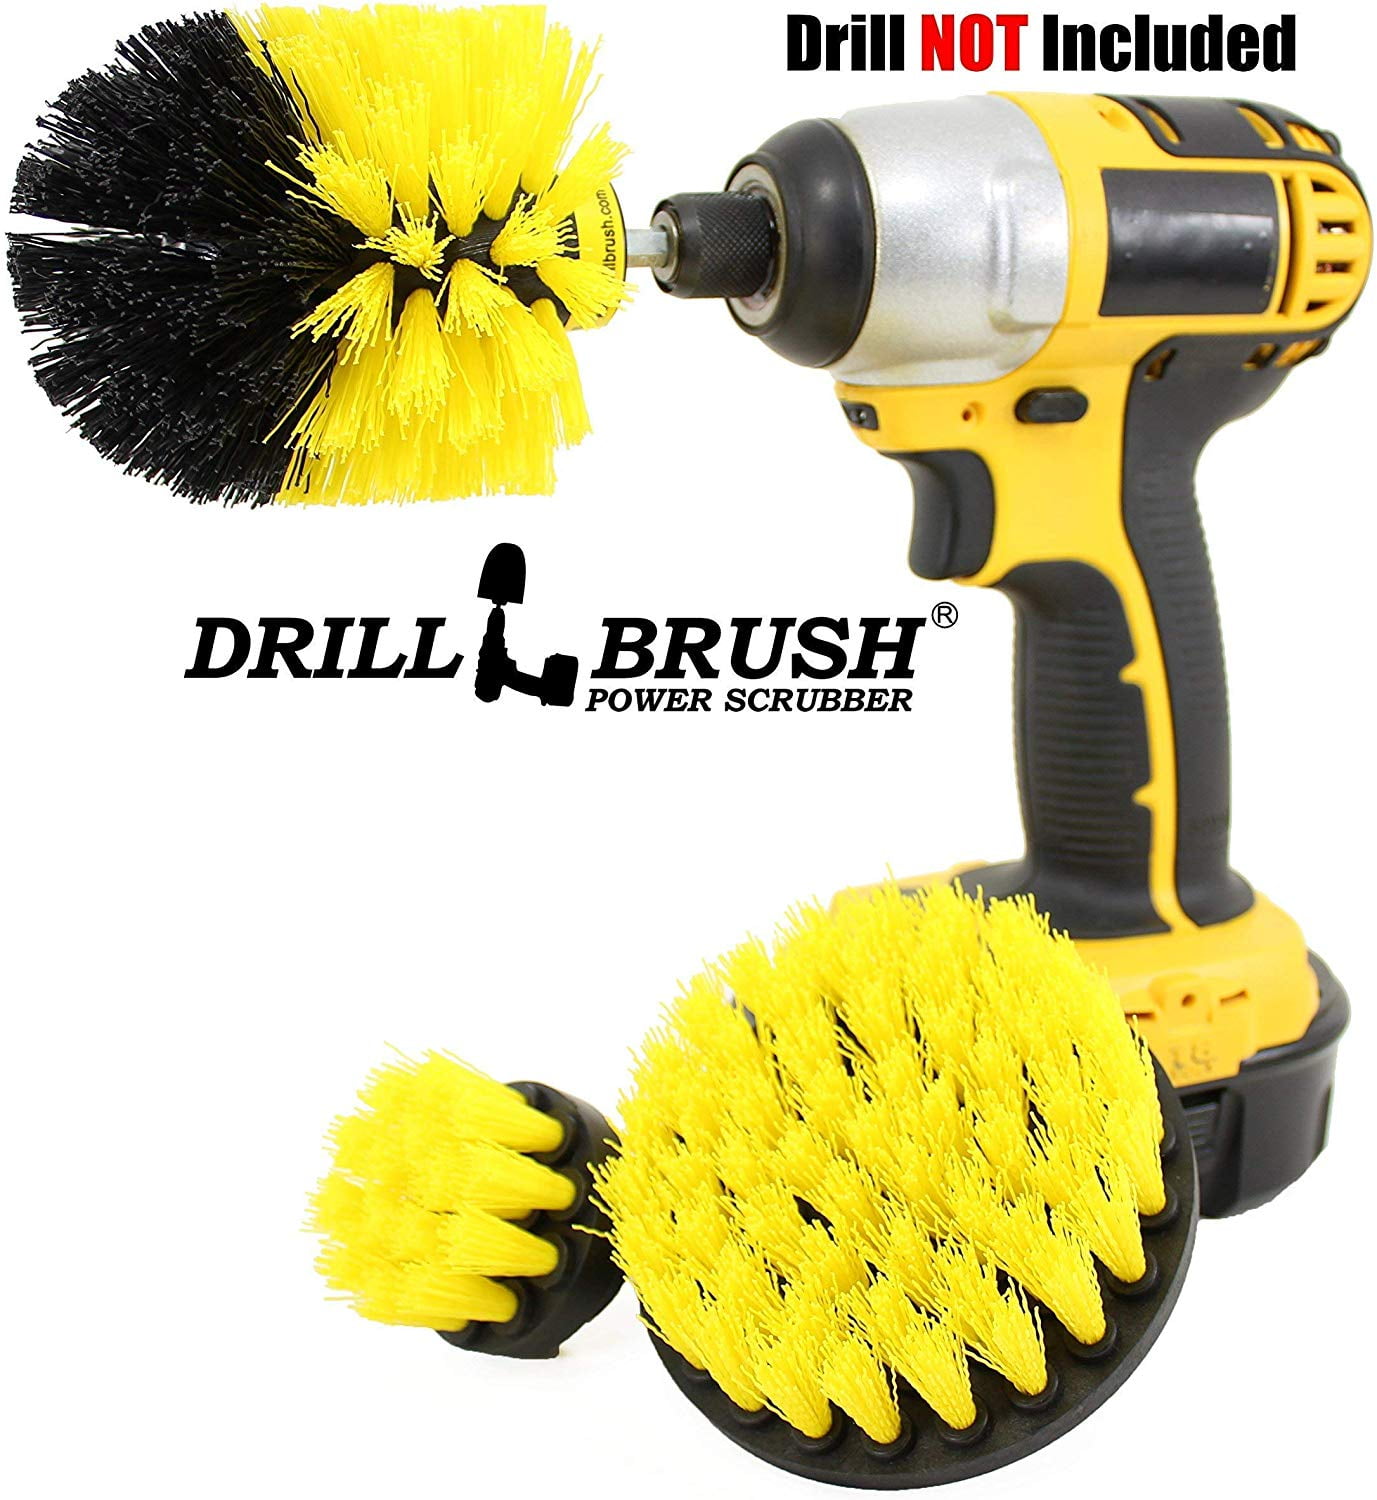 Drill Brush Set Power Scrubber Drill Attachments For Carpet Tile Grout Clean J 